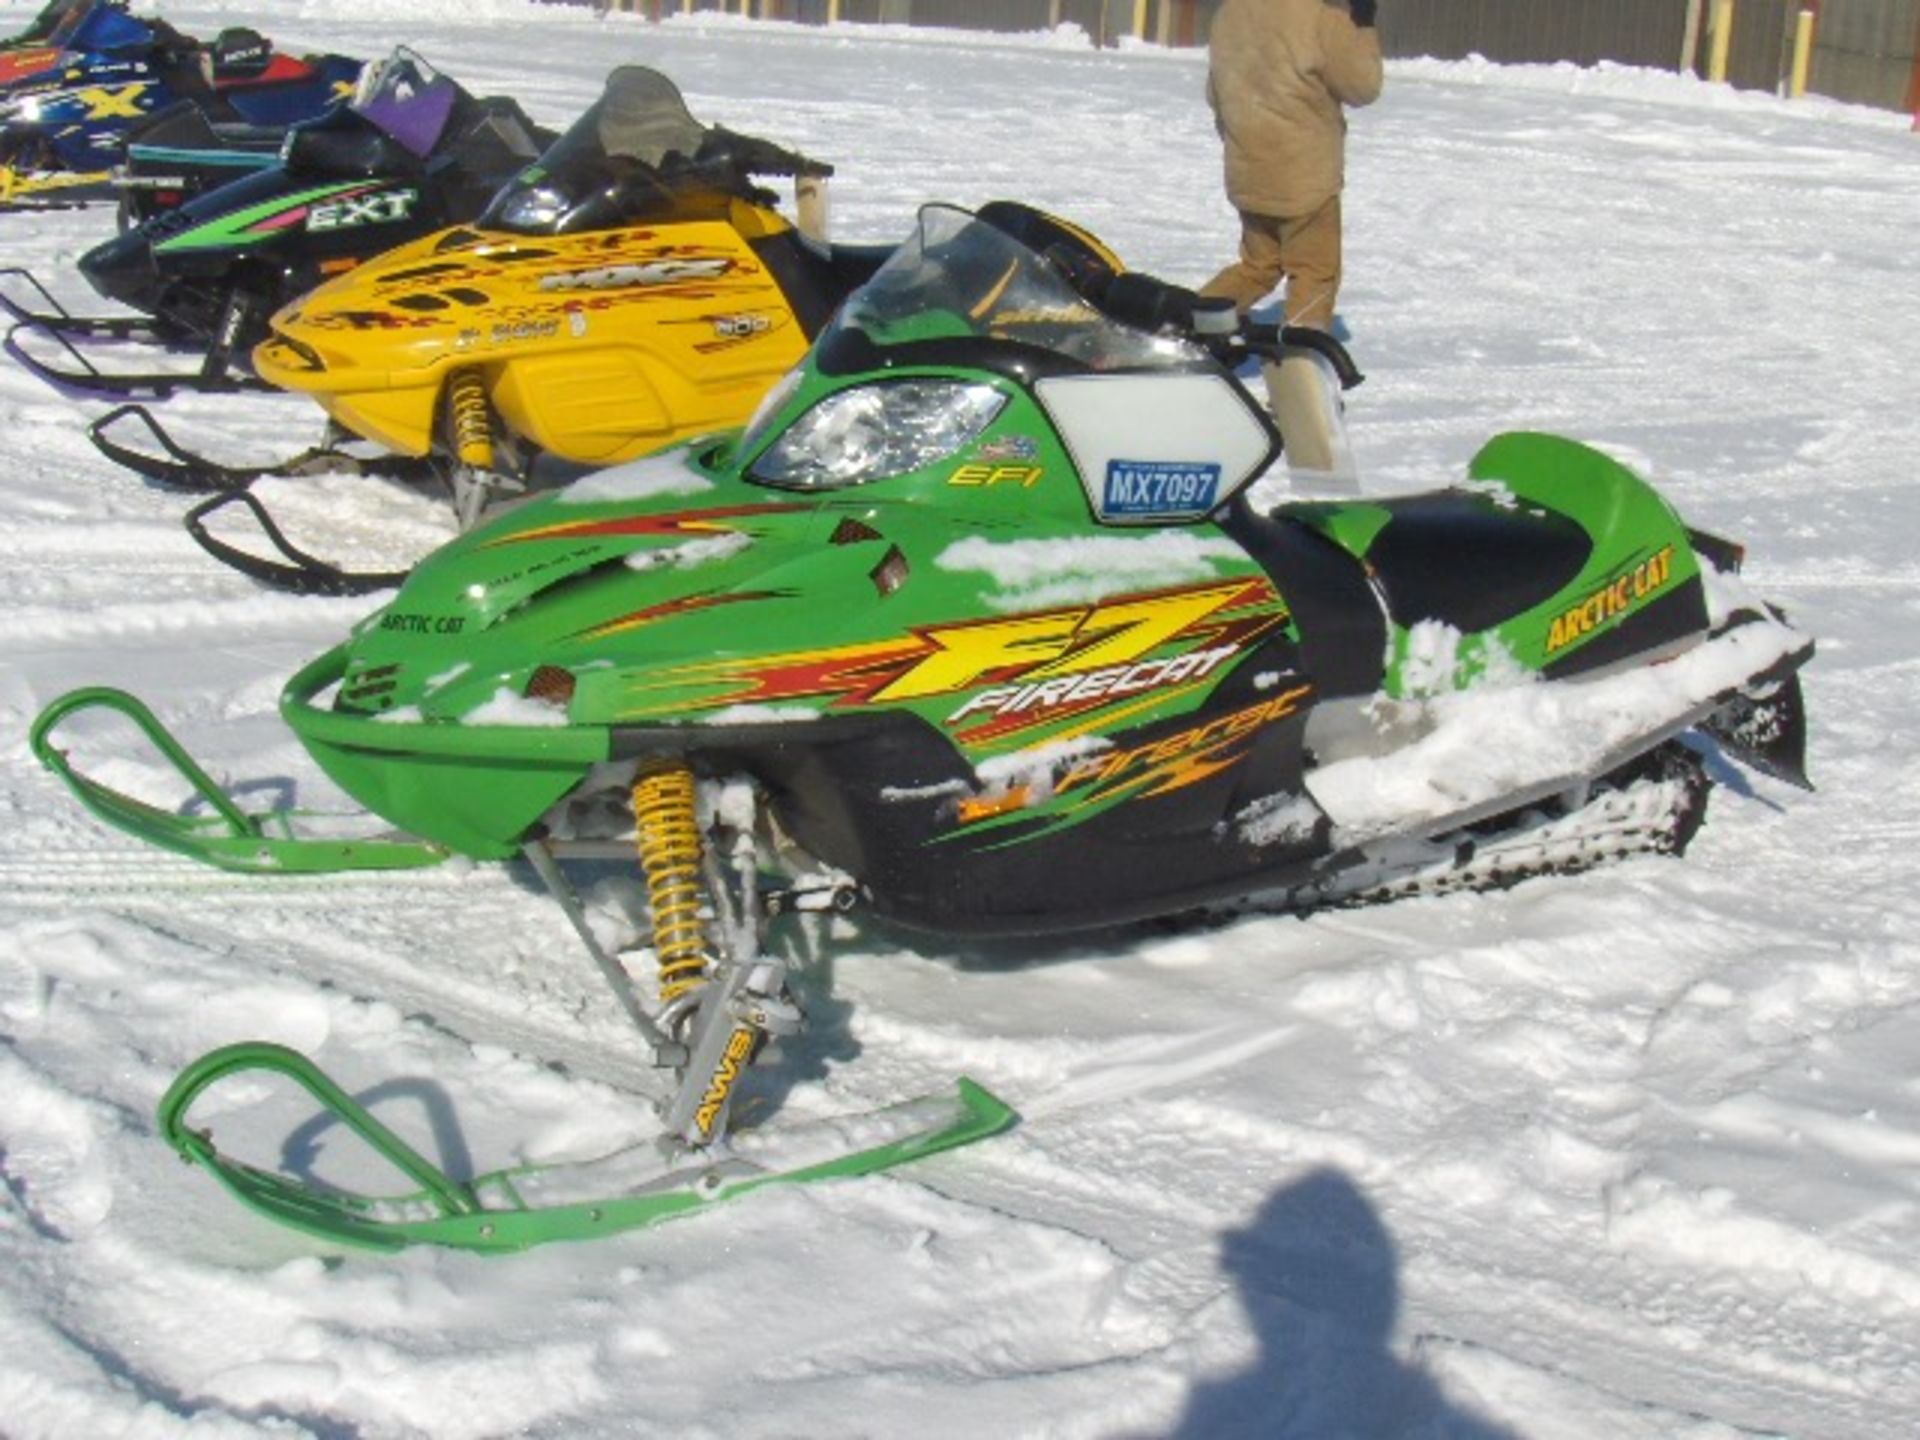 2004 ARCTIC CAT 700 F7  4UM04SNW54T138966 snowmobile, owner started at time of auction check in,